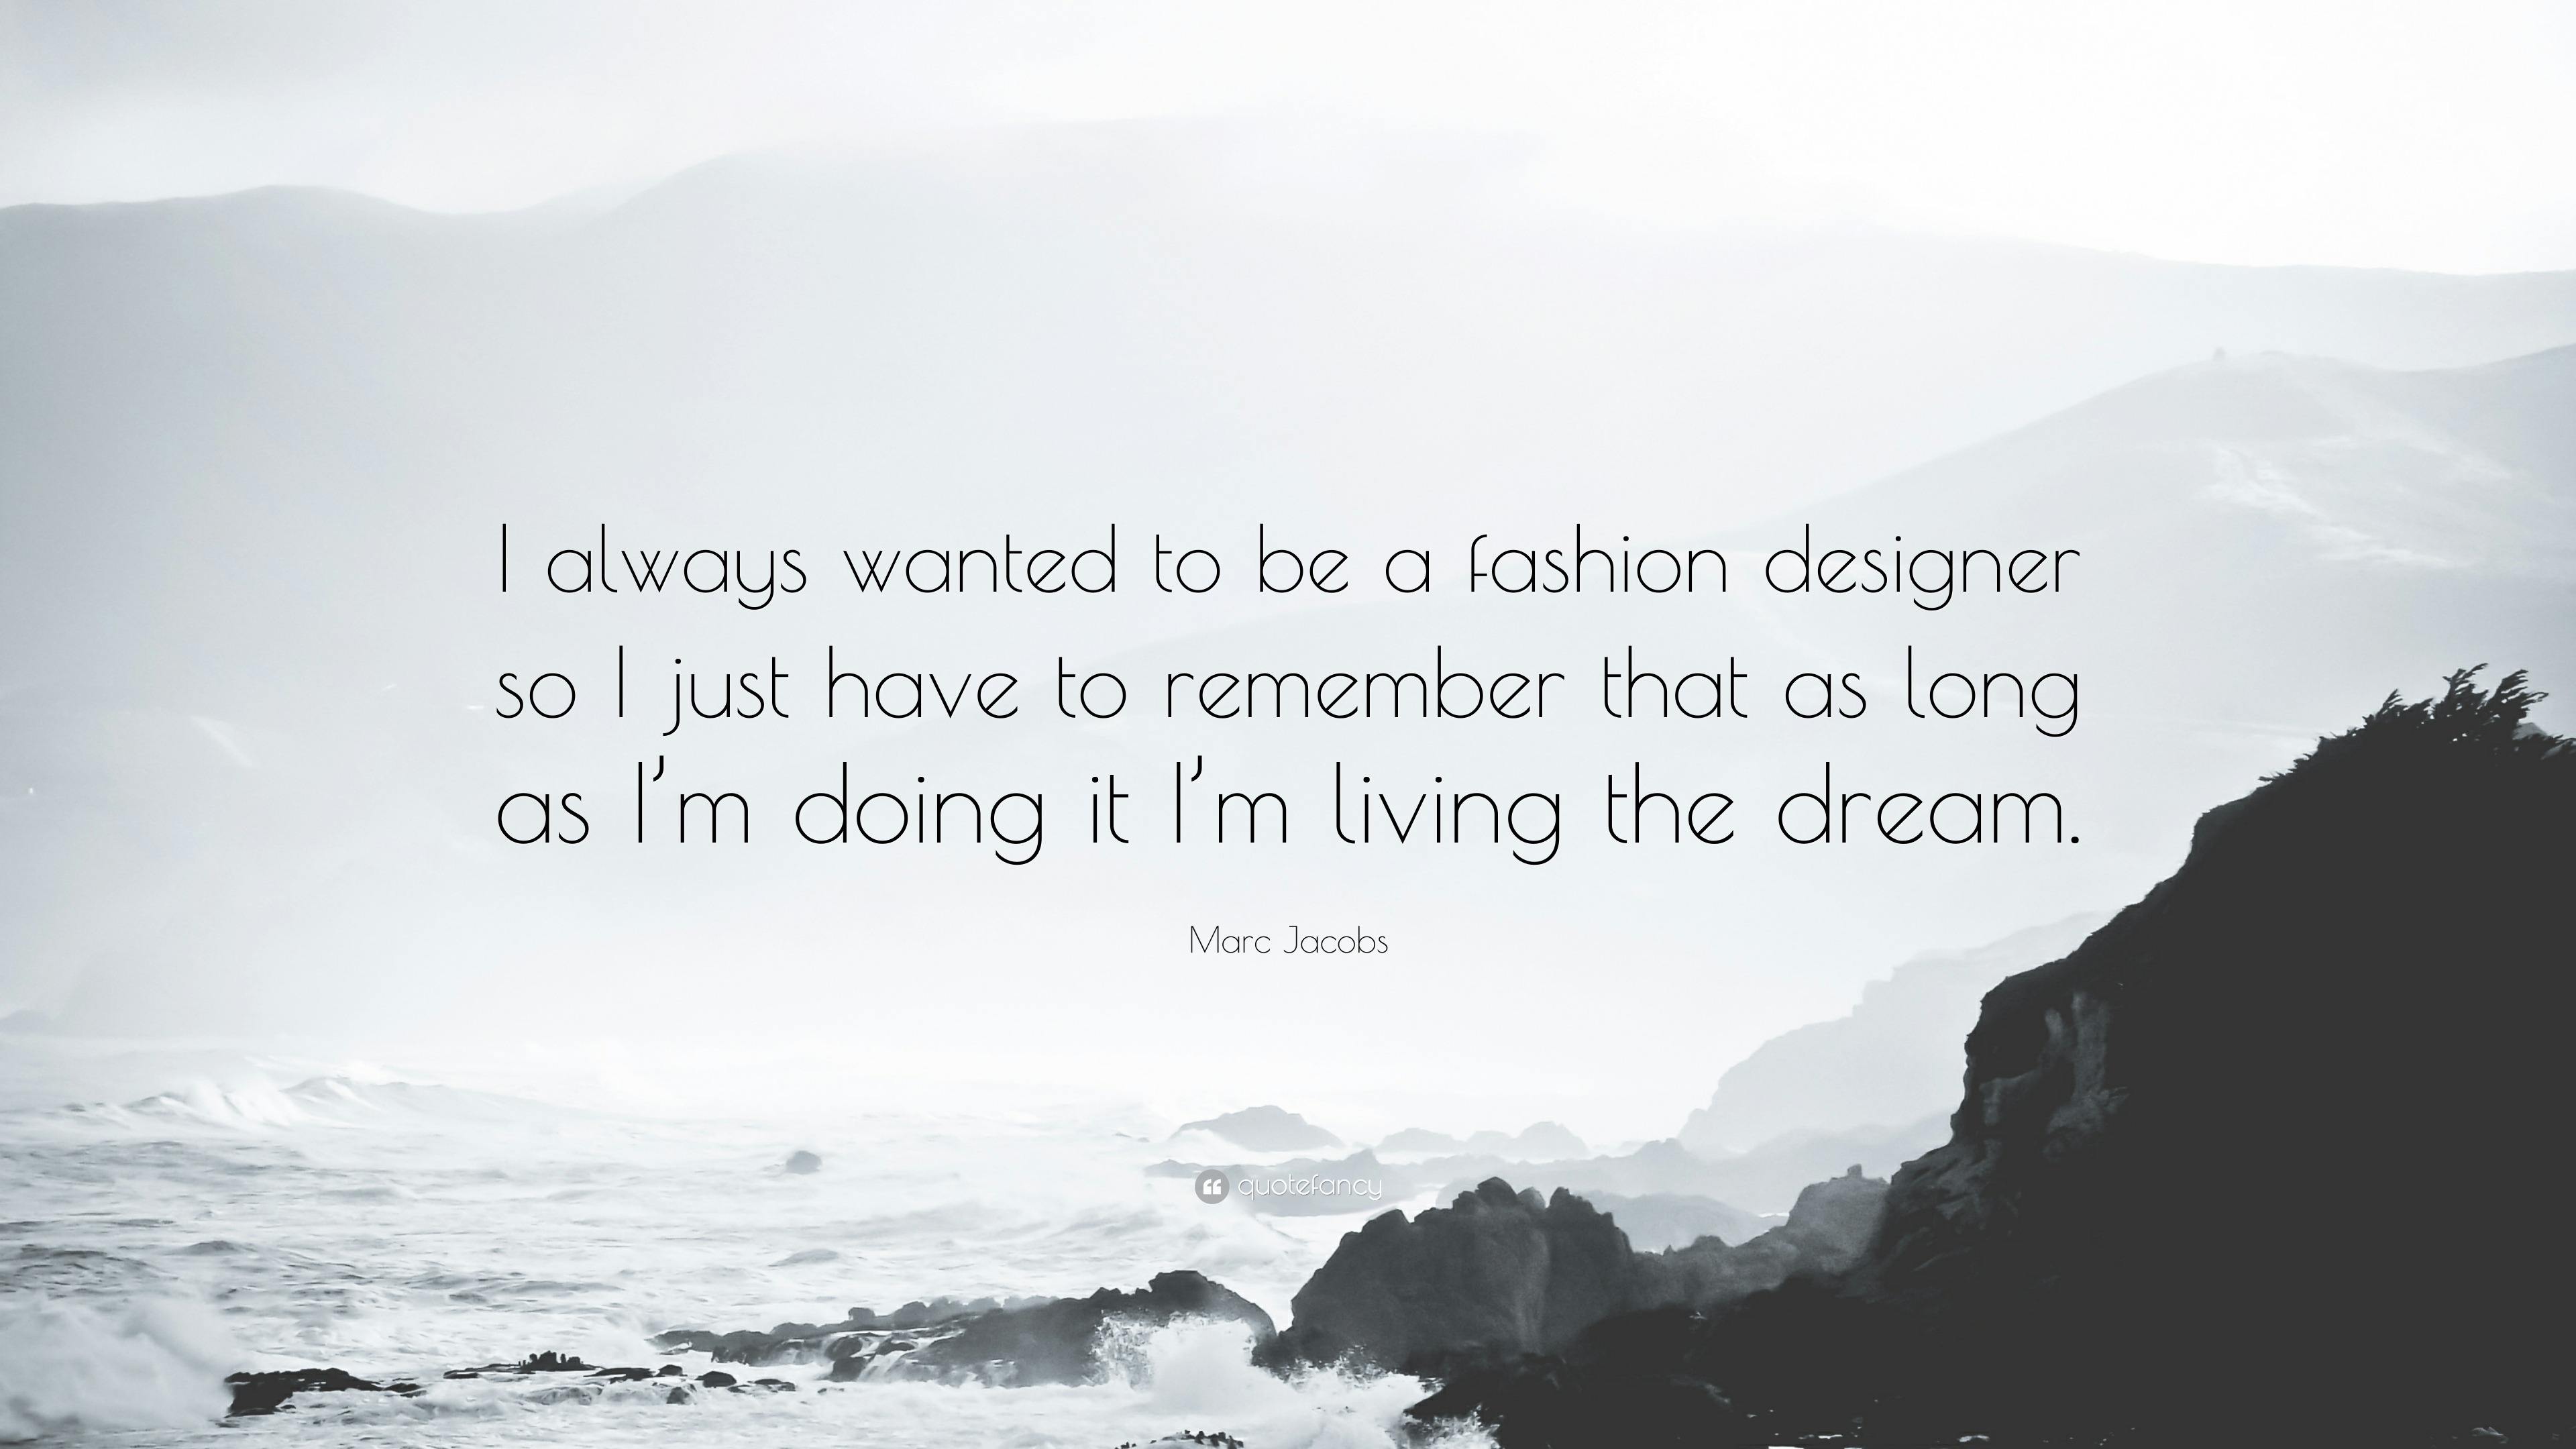 Marc Jacobs Quote: “I always wanted to be a fashion designer so I